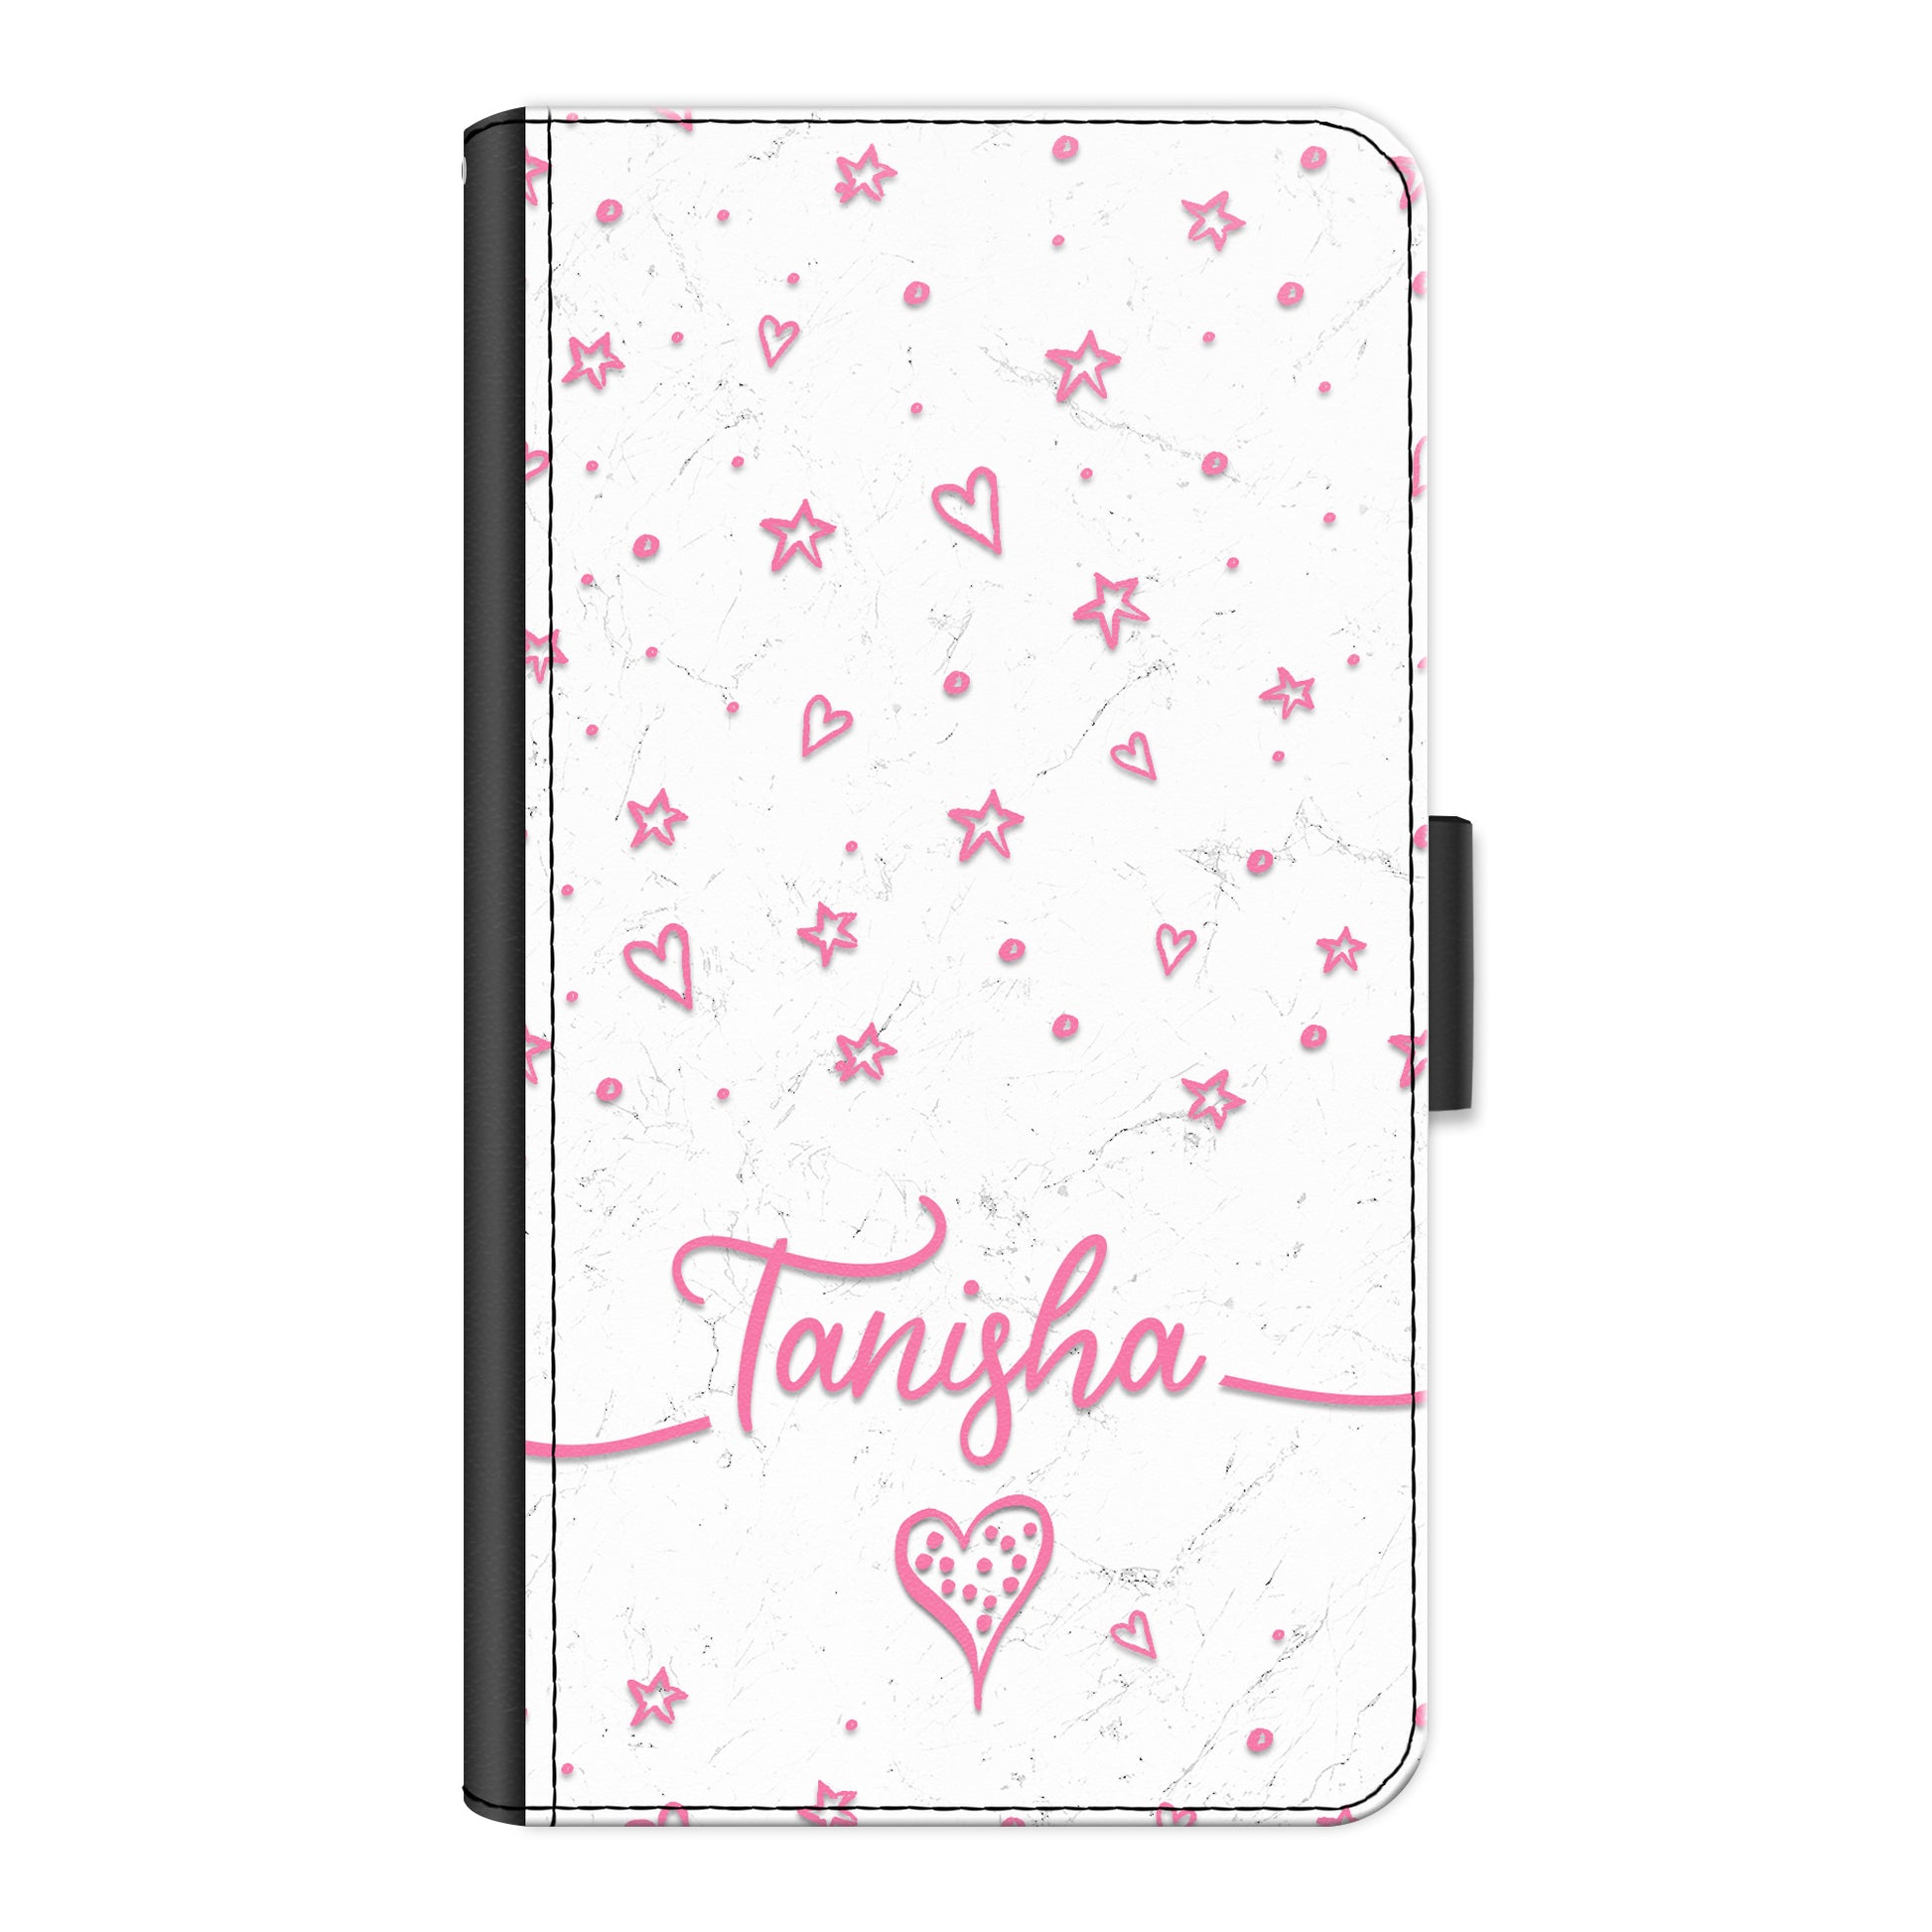 Personalised Xiaomi Phone Leather Wallet with Pink Stylish text, Stars and Hearts on White Marble